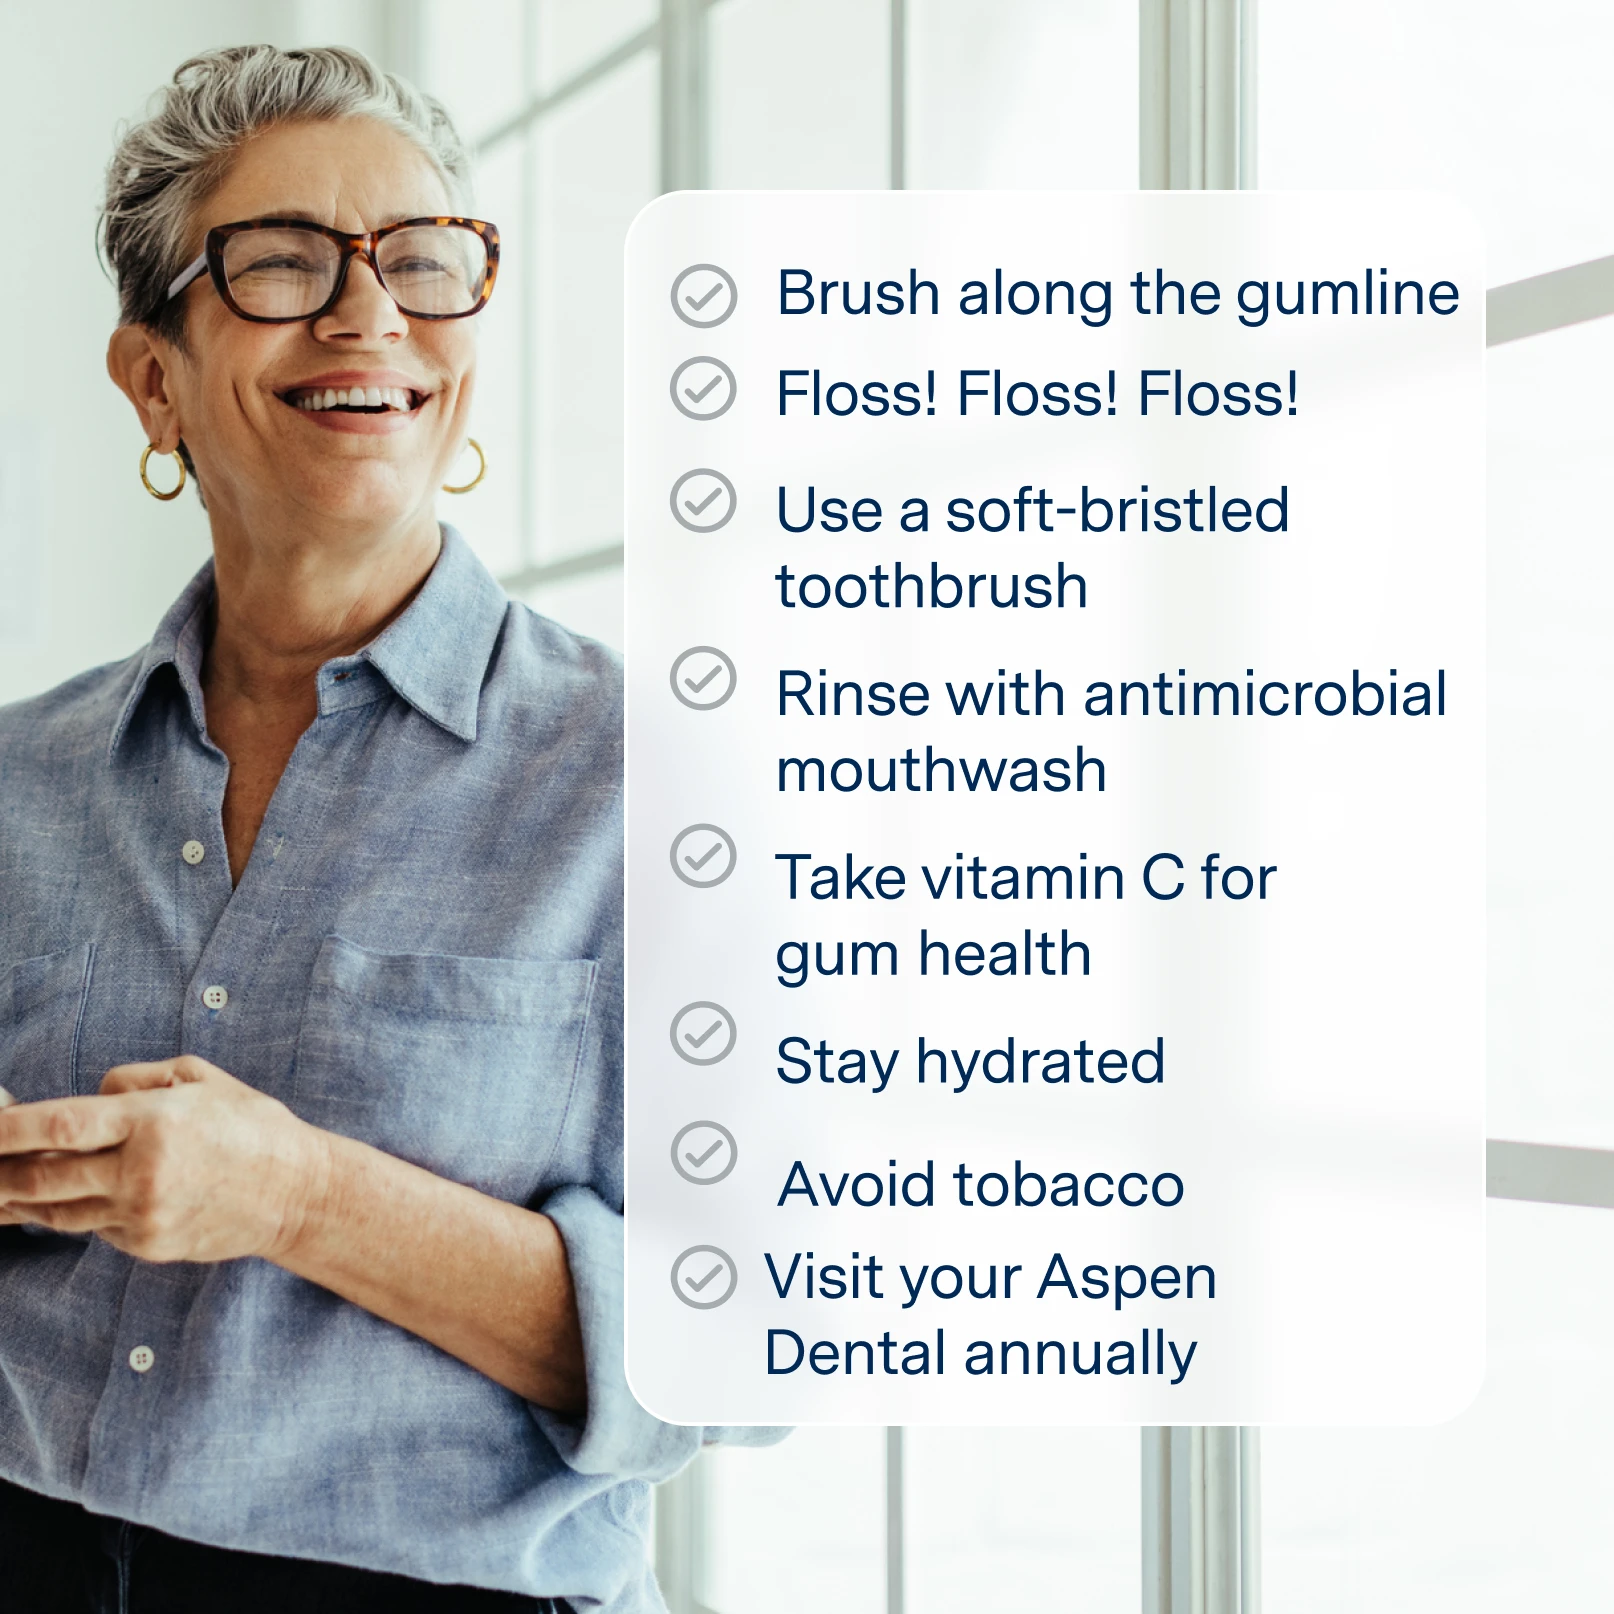 Gingivitis self-care:
Brush along the gumline
Floss! Floss! Floss!
Use a soft-bristled toothbrush
Rinse with antimicrobial mouthwash
Take vitamin C for gum health
Stay hydrated
Avoid tobacco
Visit your Aspen Dental Annually